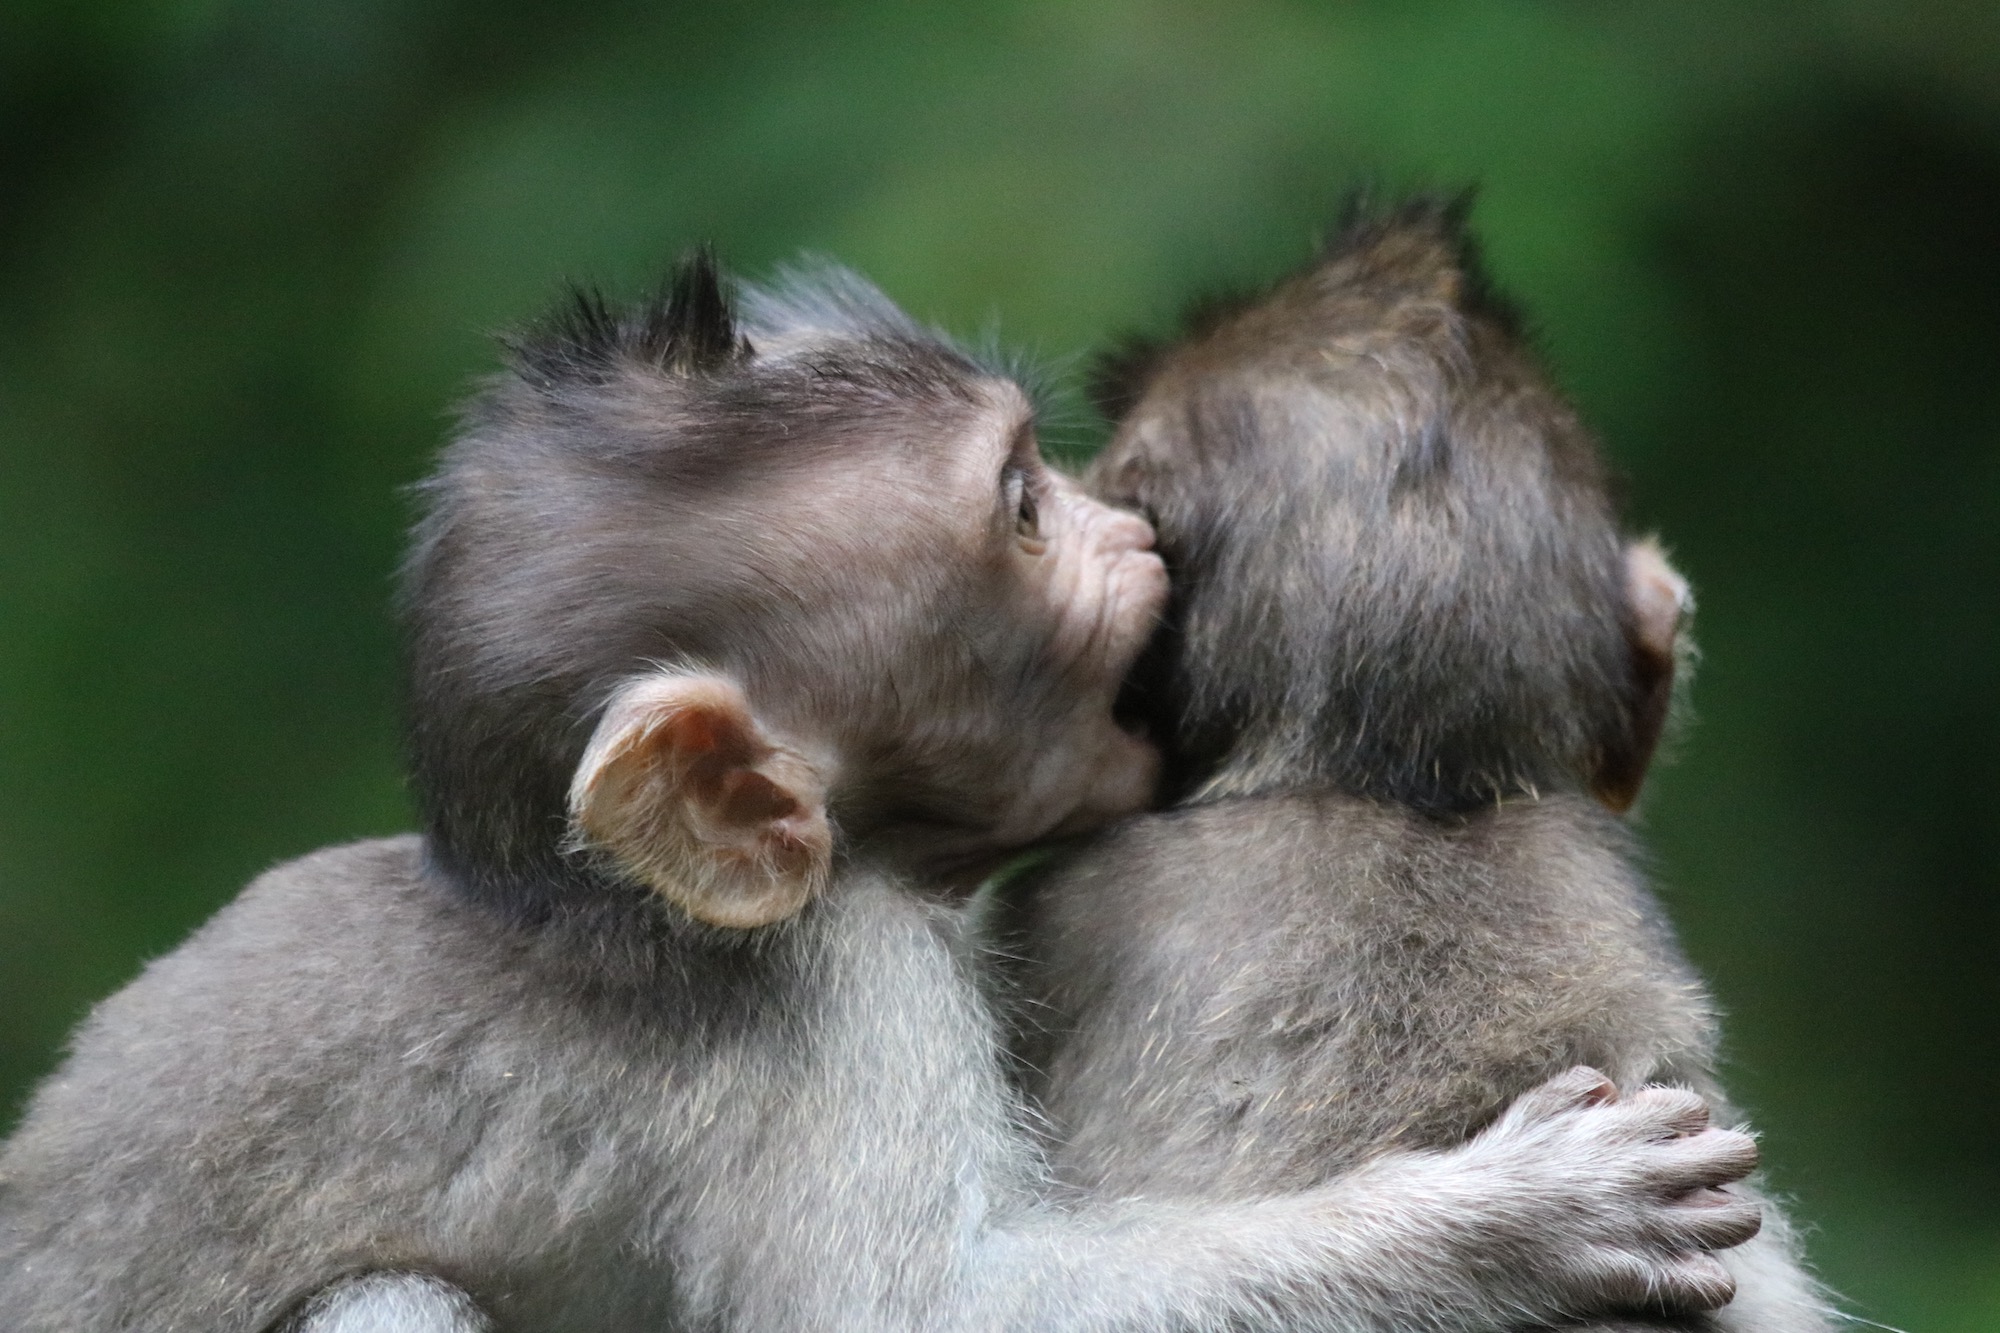 macaques-brothers-6.jpg